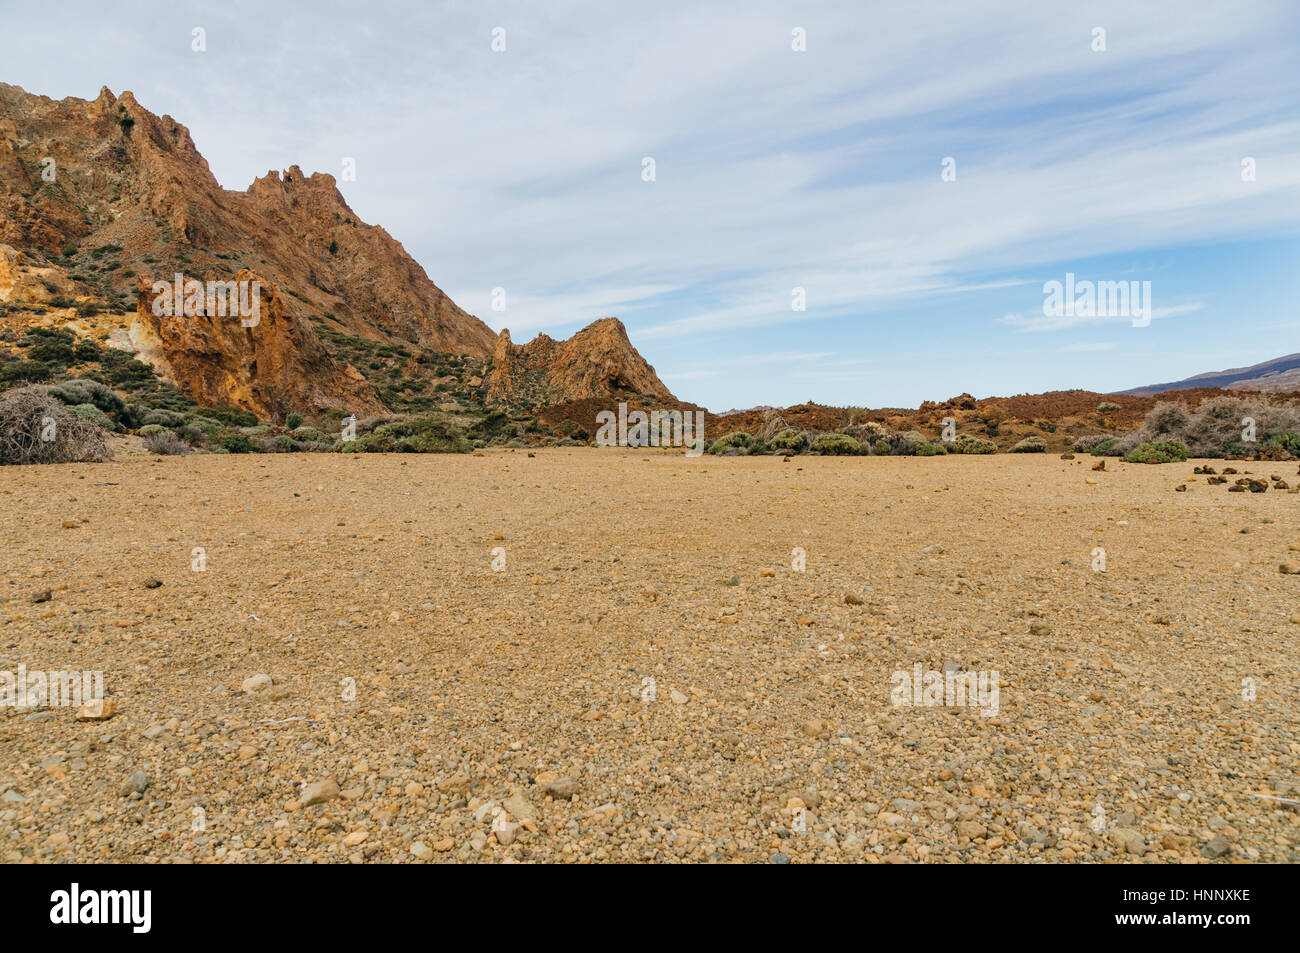 Volcanic landscape with erosion and sparse vegetation. Tenerife, Canary islands, Spain Stock Photo